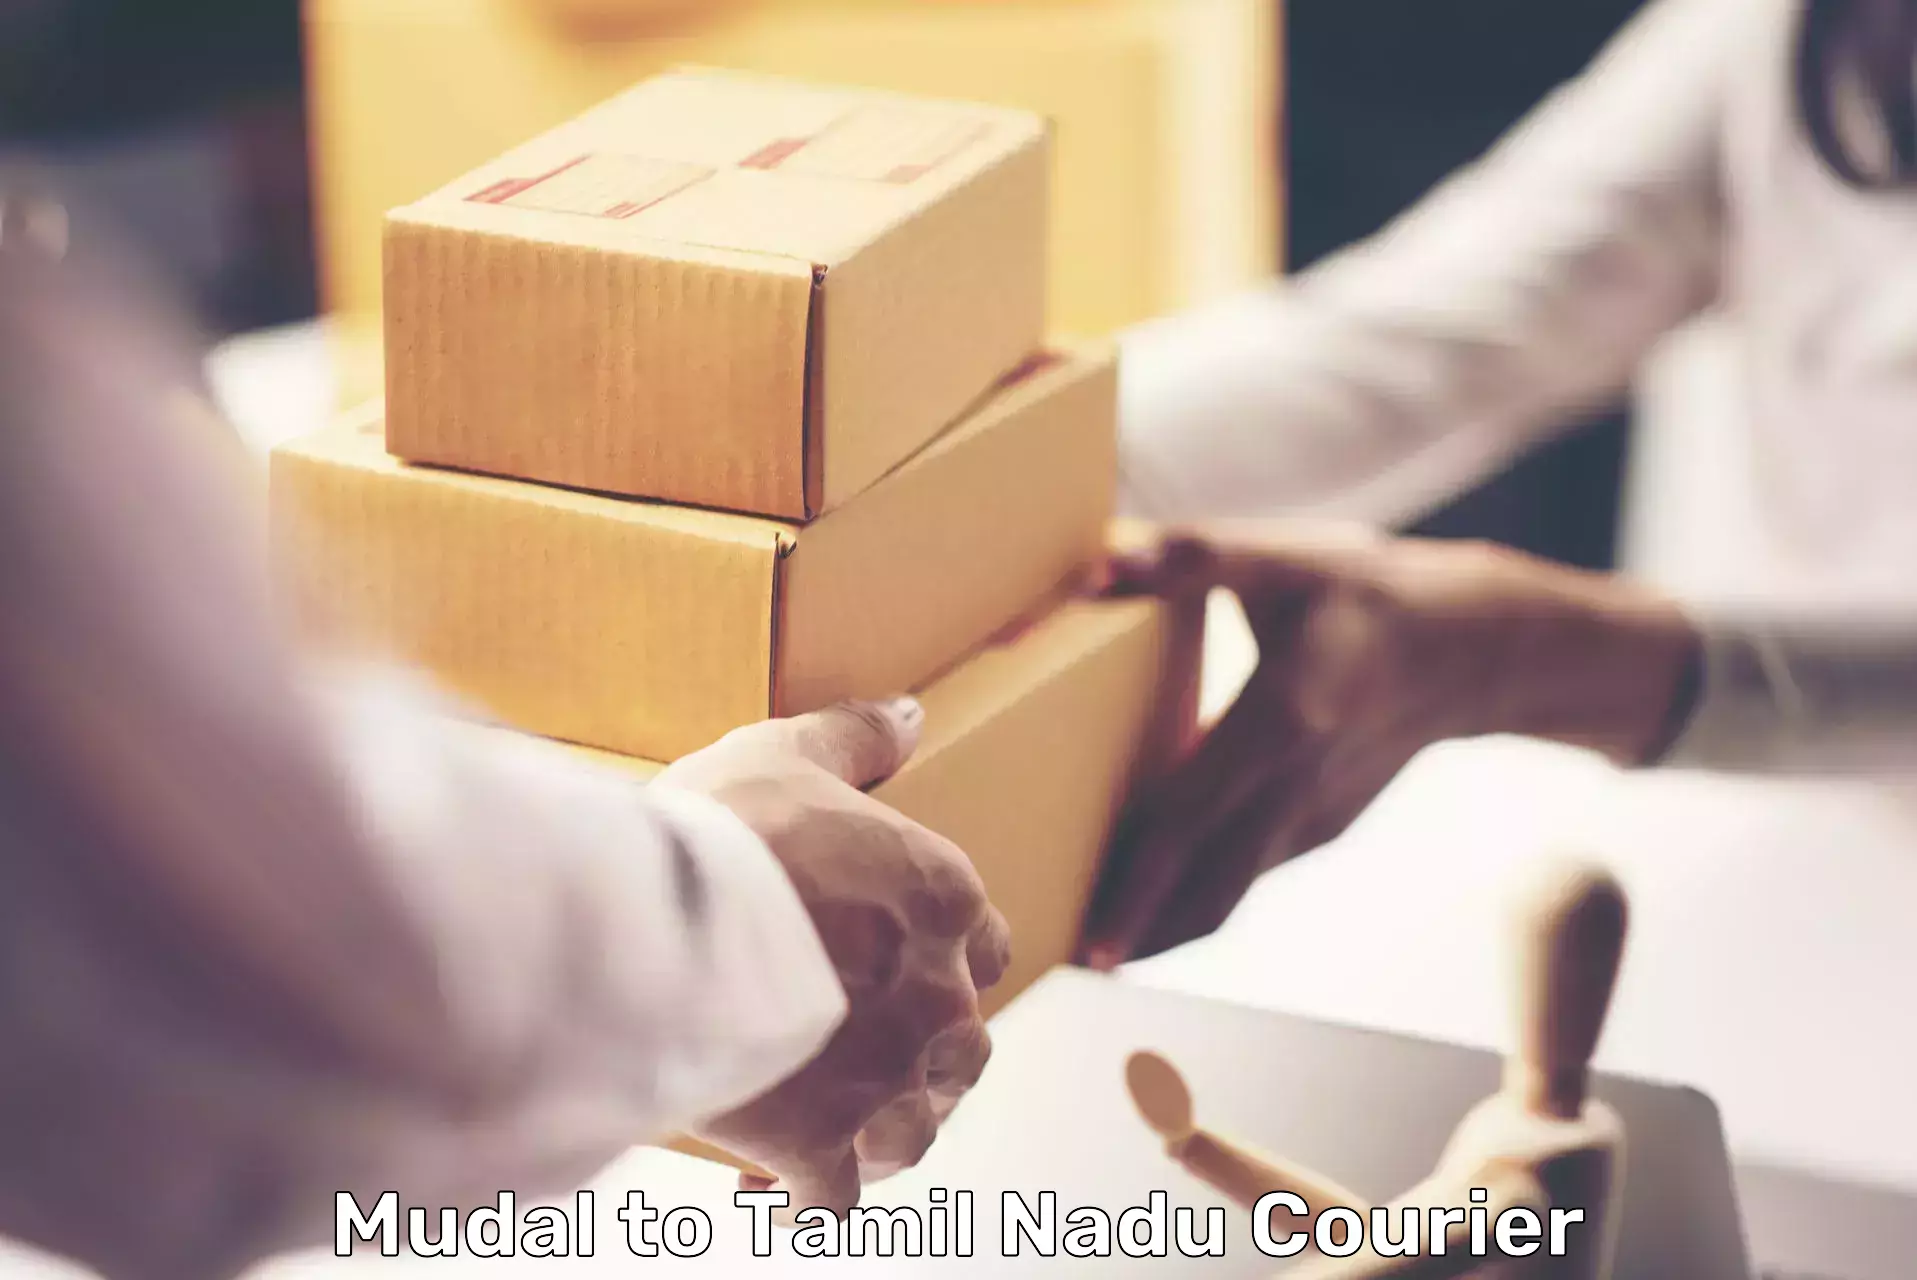 24-hour delivery options Mudal to Tamil Nadu